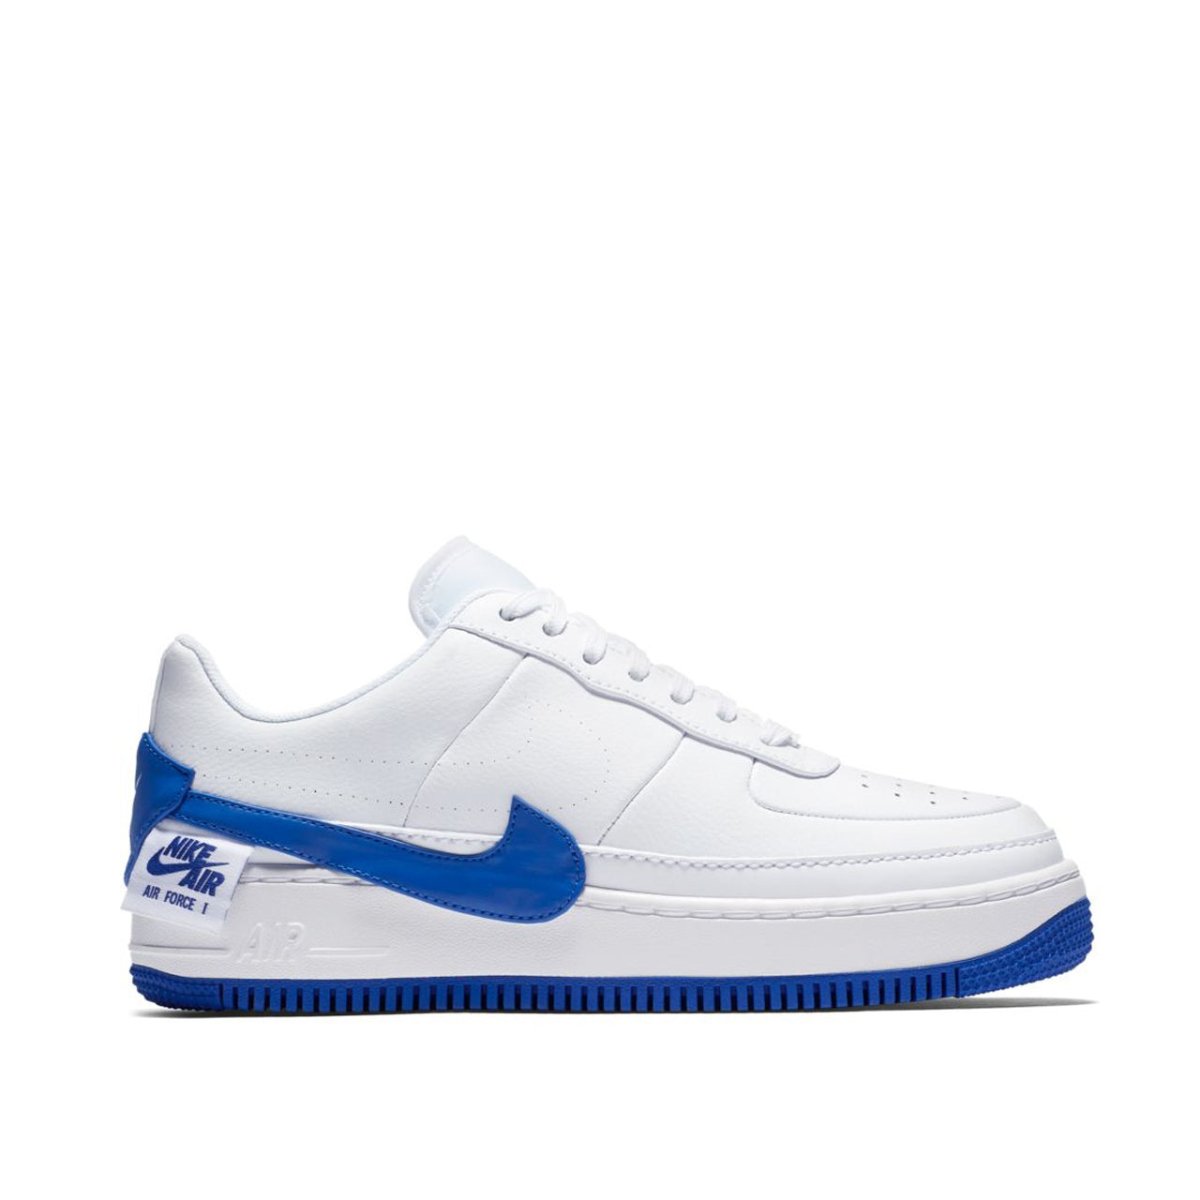 WMNS Air 1 Jester XX (White / Blue) AO1220-104 Allike Store